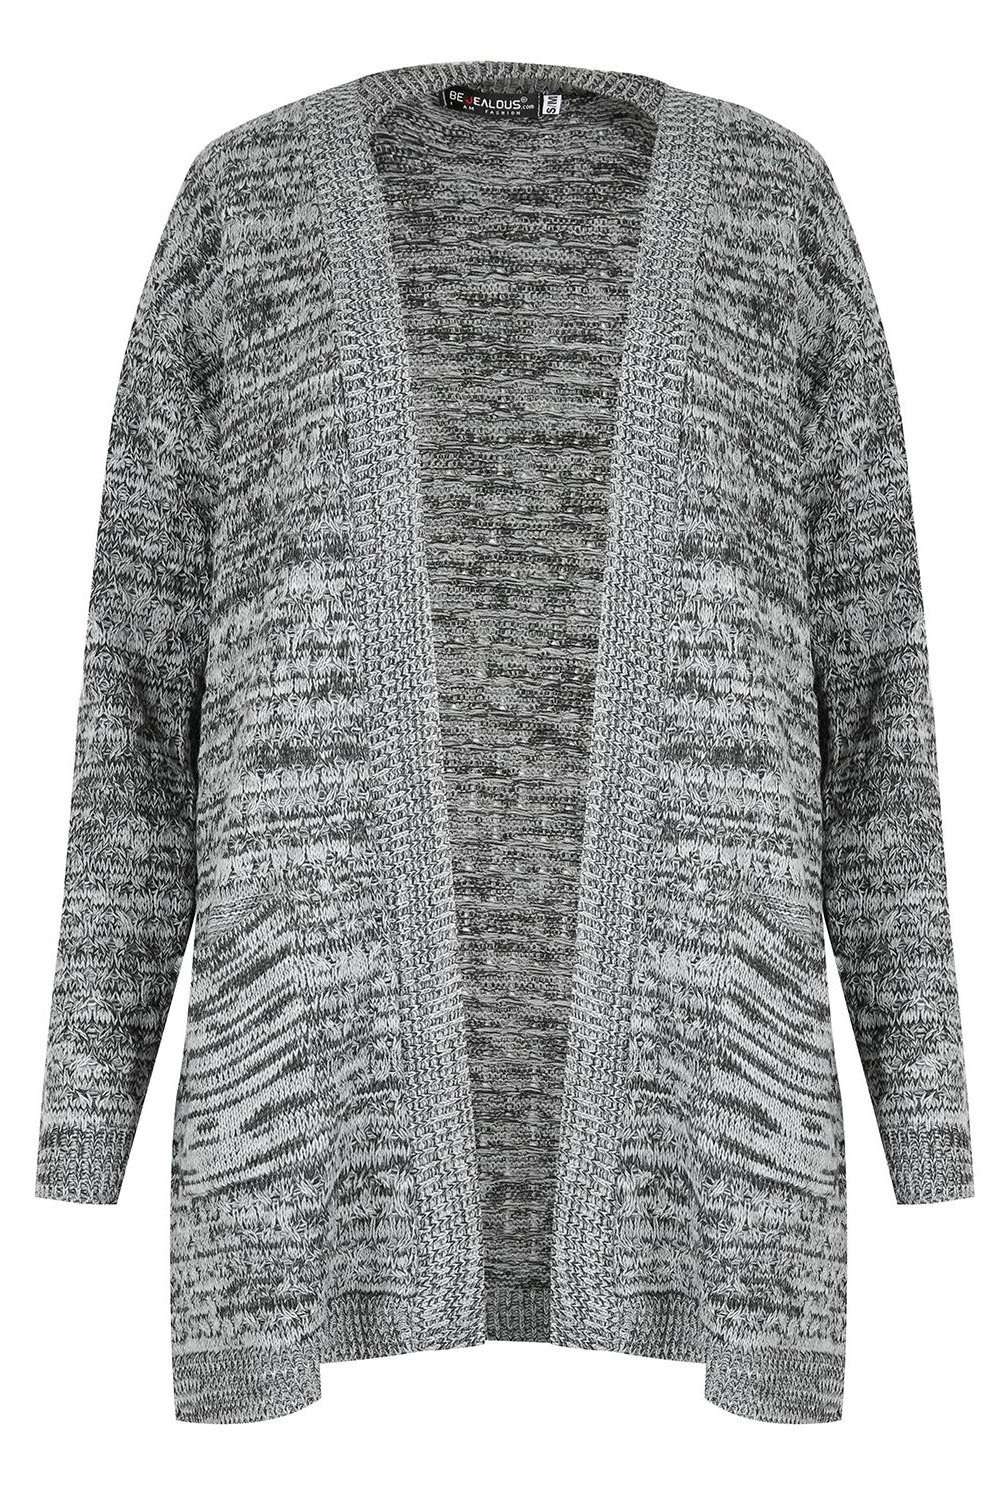 Mary Long Sleeve Knitted Cardigan With Pockets - bejealous-com